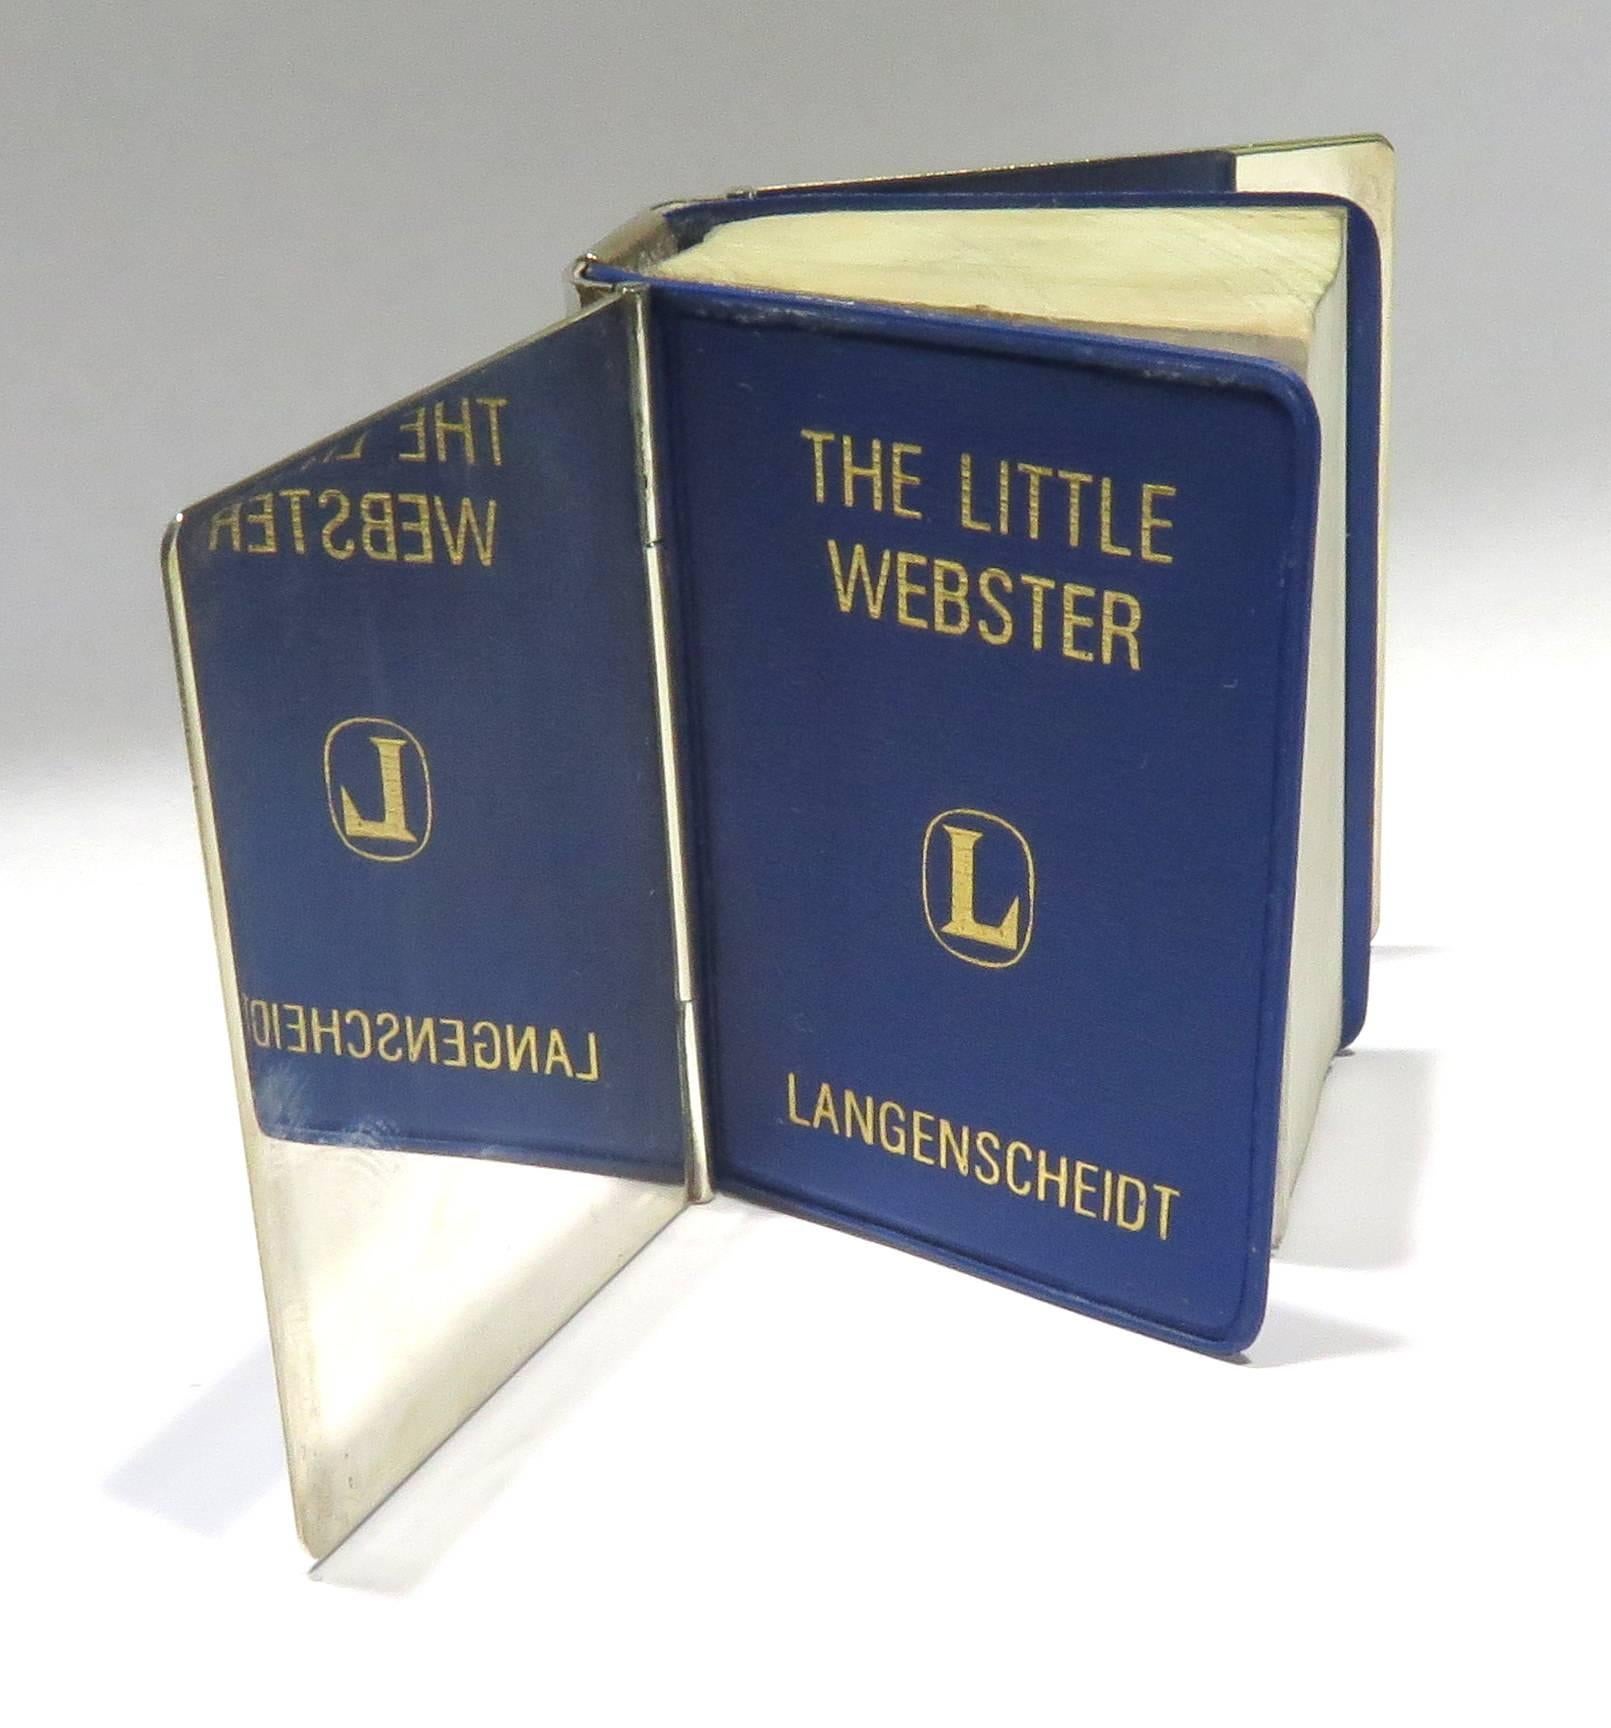 Tiffany Sterling Miniature Webster Dictionary 1